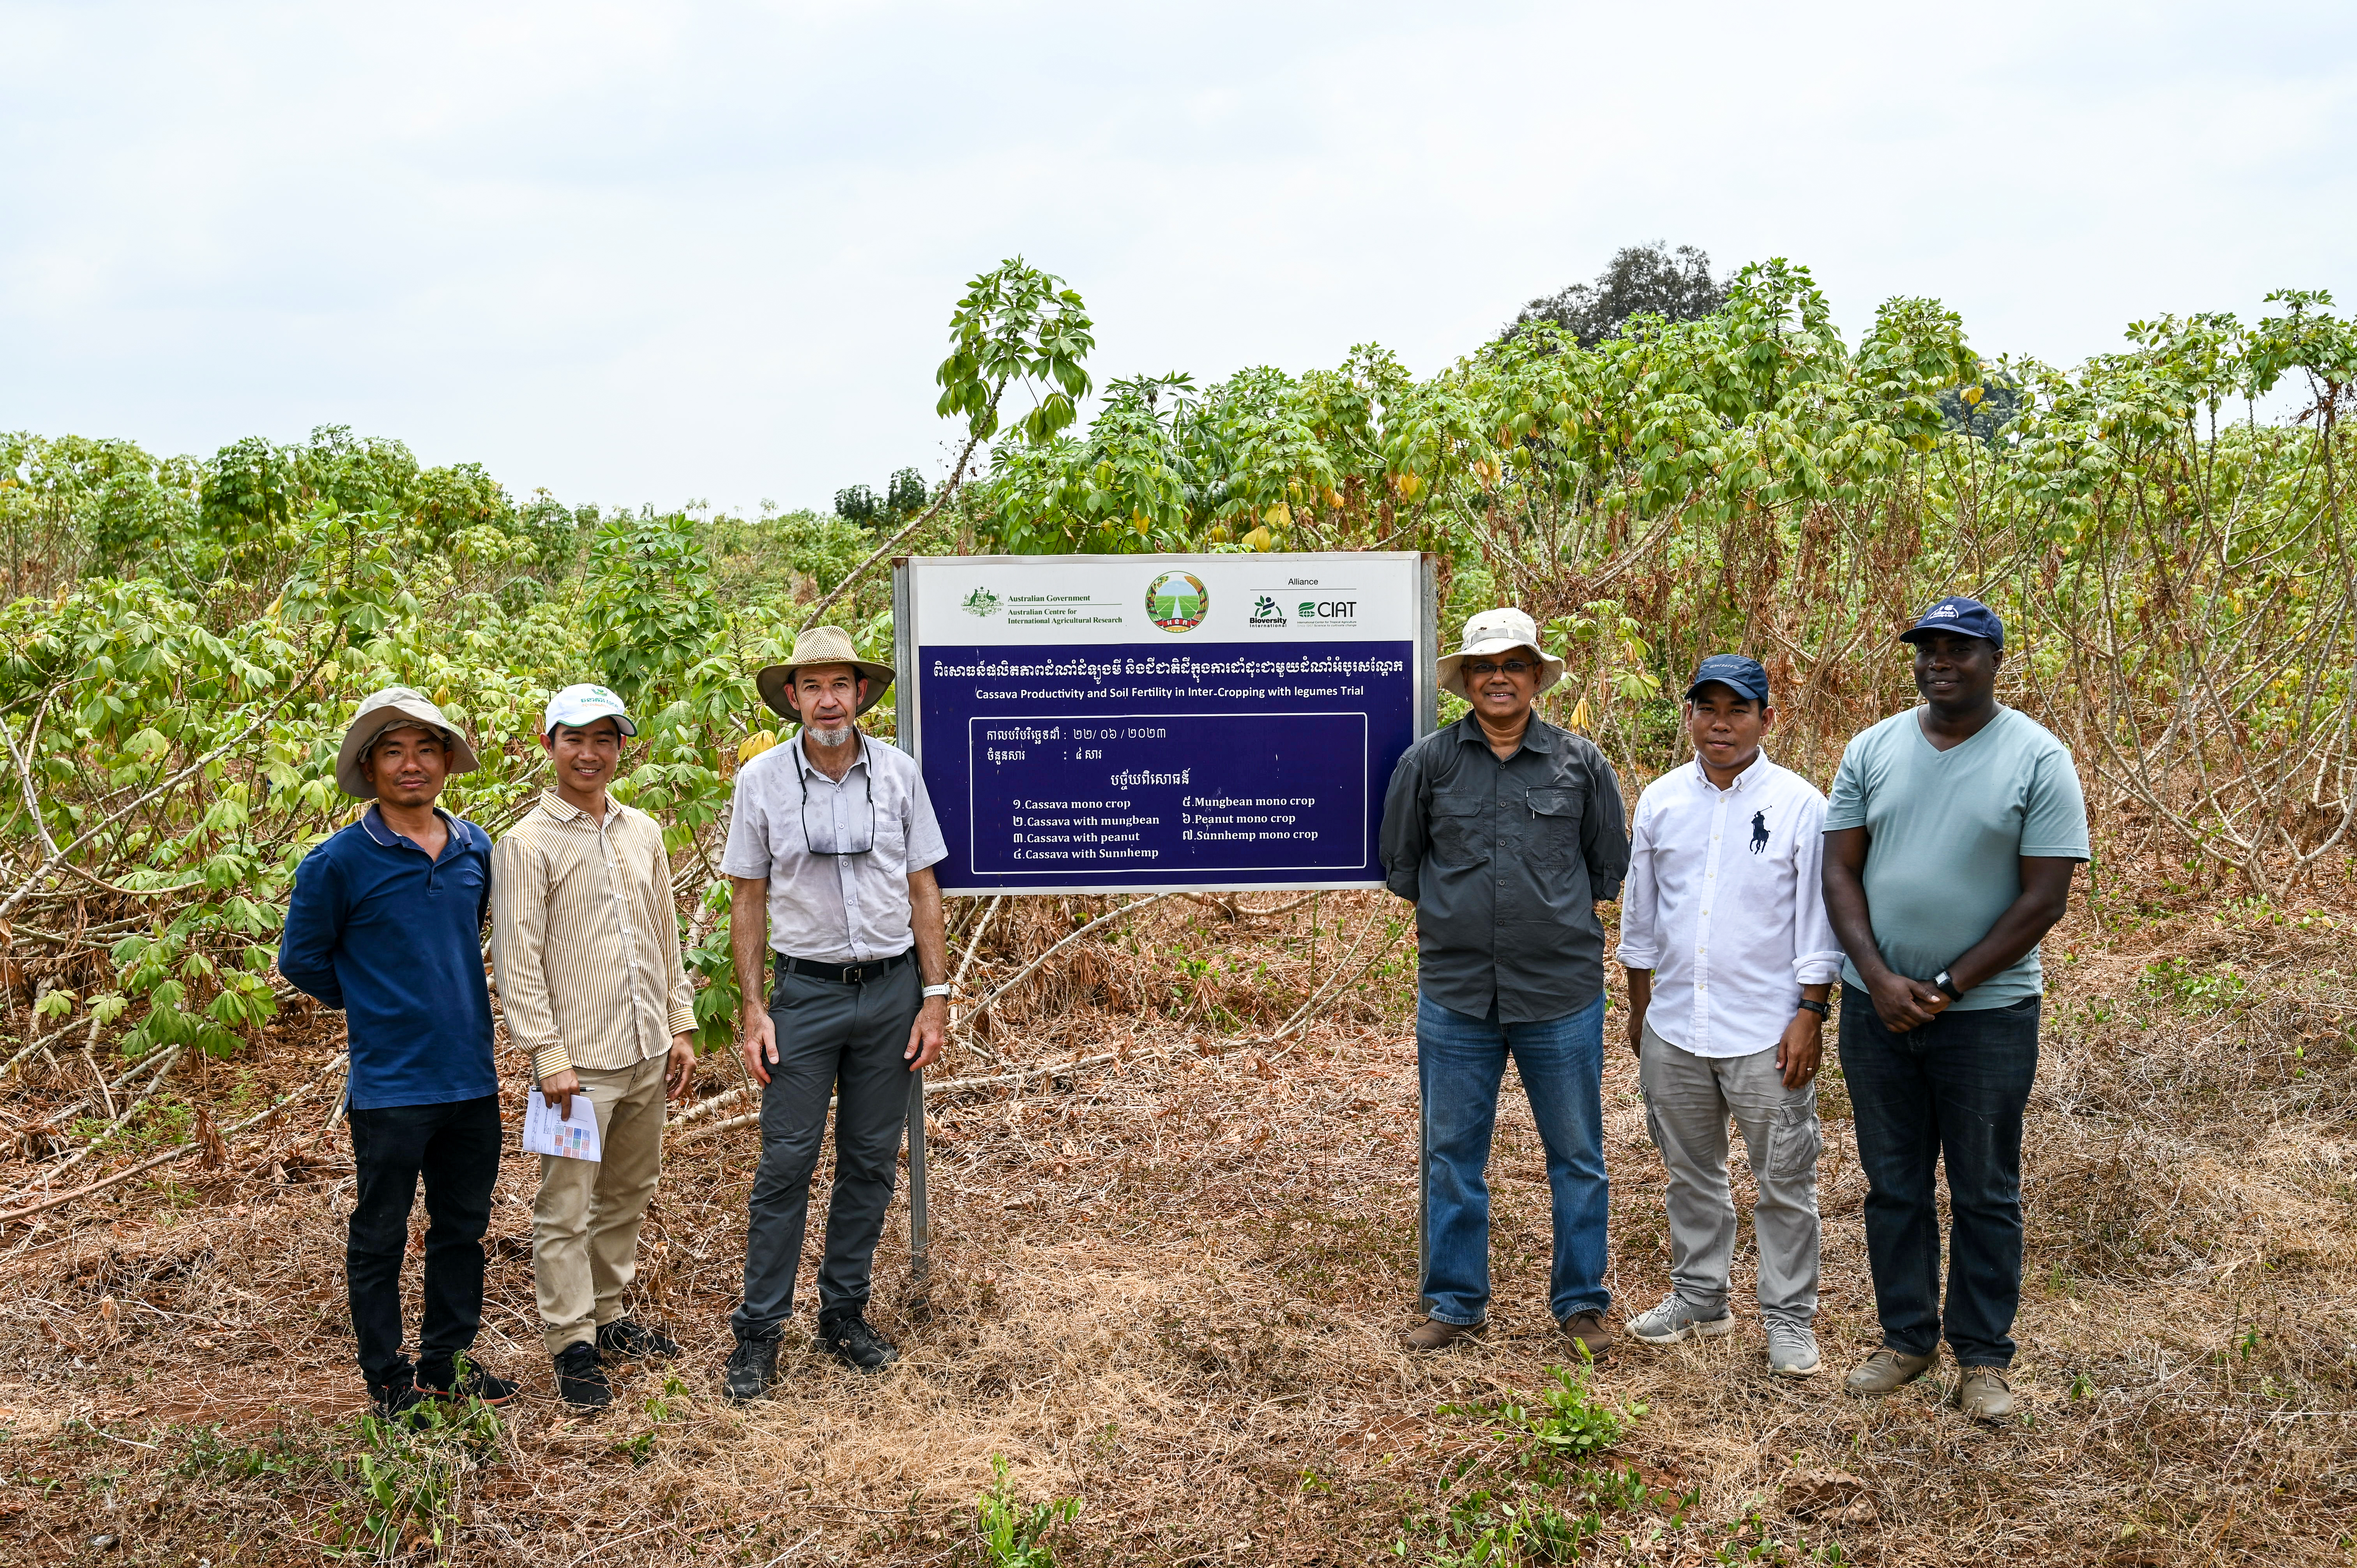 Group of 6 people standing near sign in front of crop fields of cassava